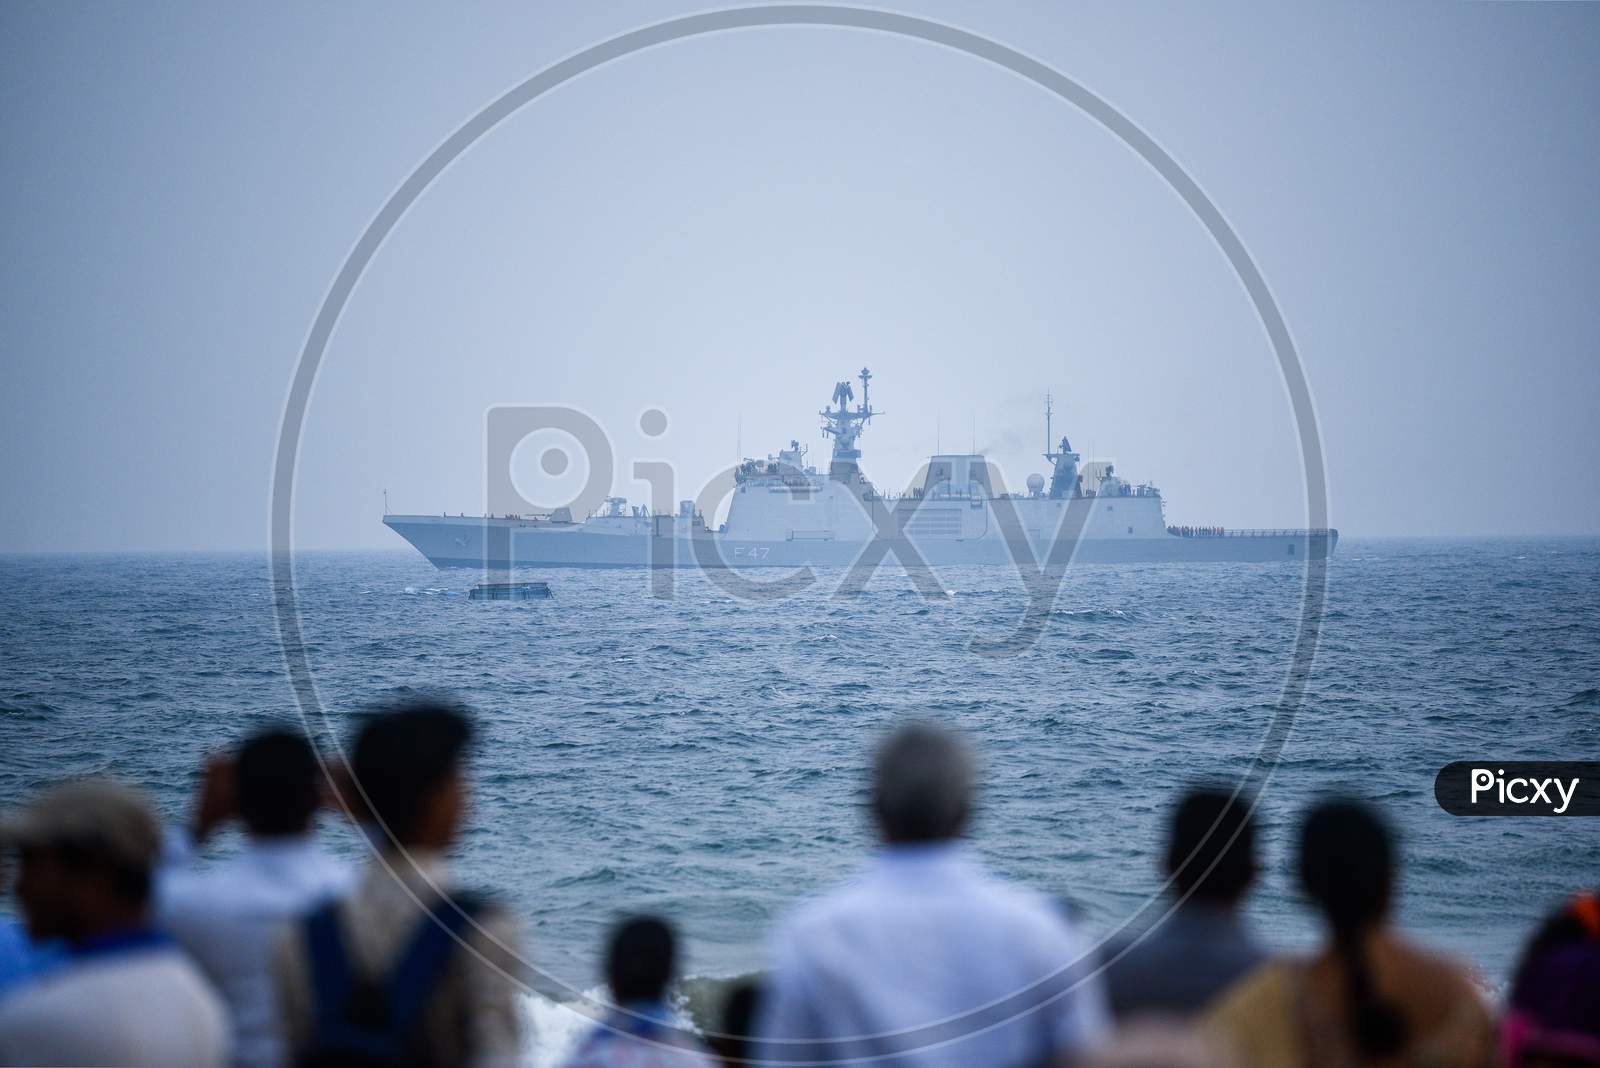 People watch an Indian Navy Ship at Visakhapatnam